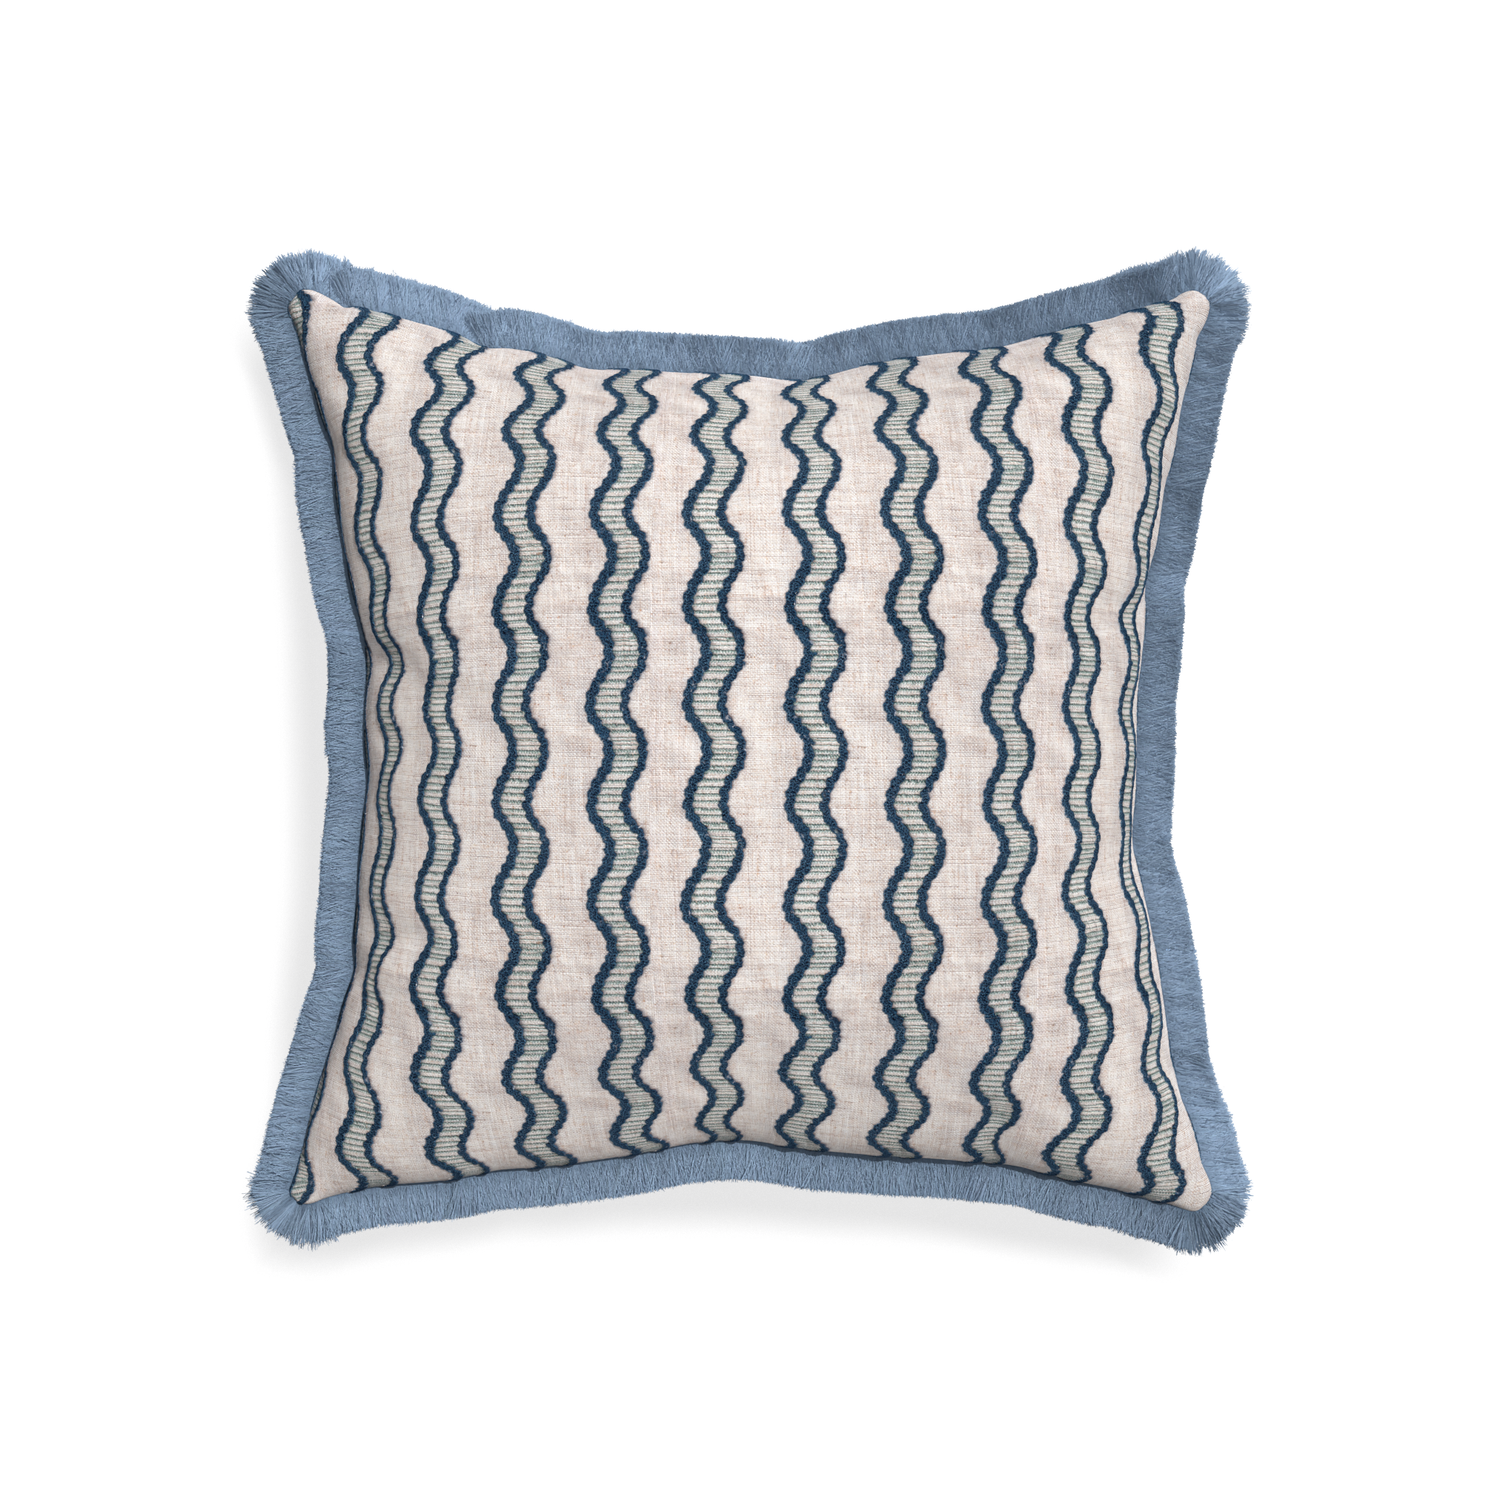 20-square beatrice custom embroidered wavepillow with sky fringe on white background